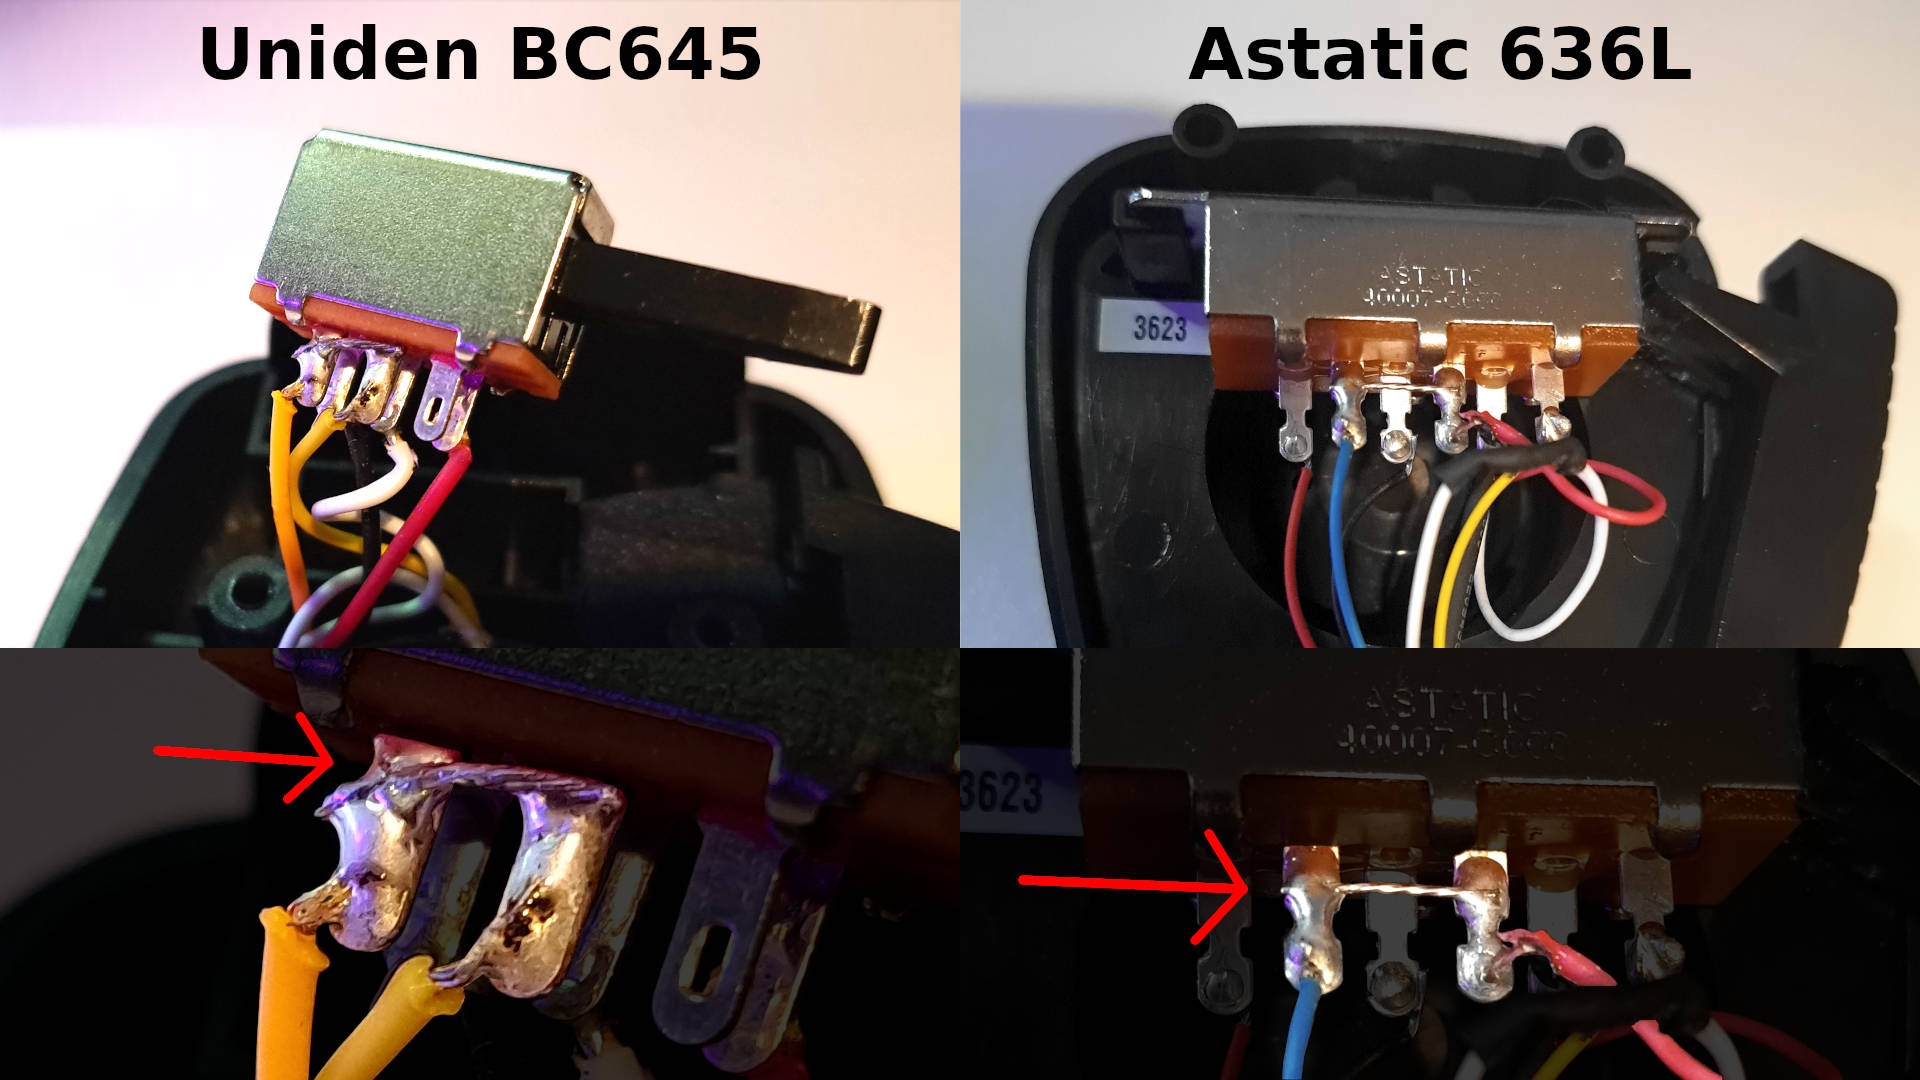 Uniden and Astatic mic modifications showing added wire